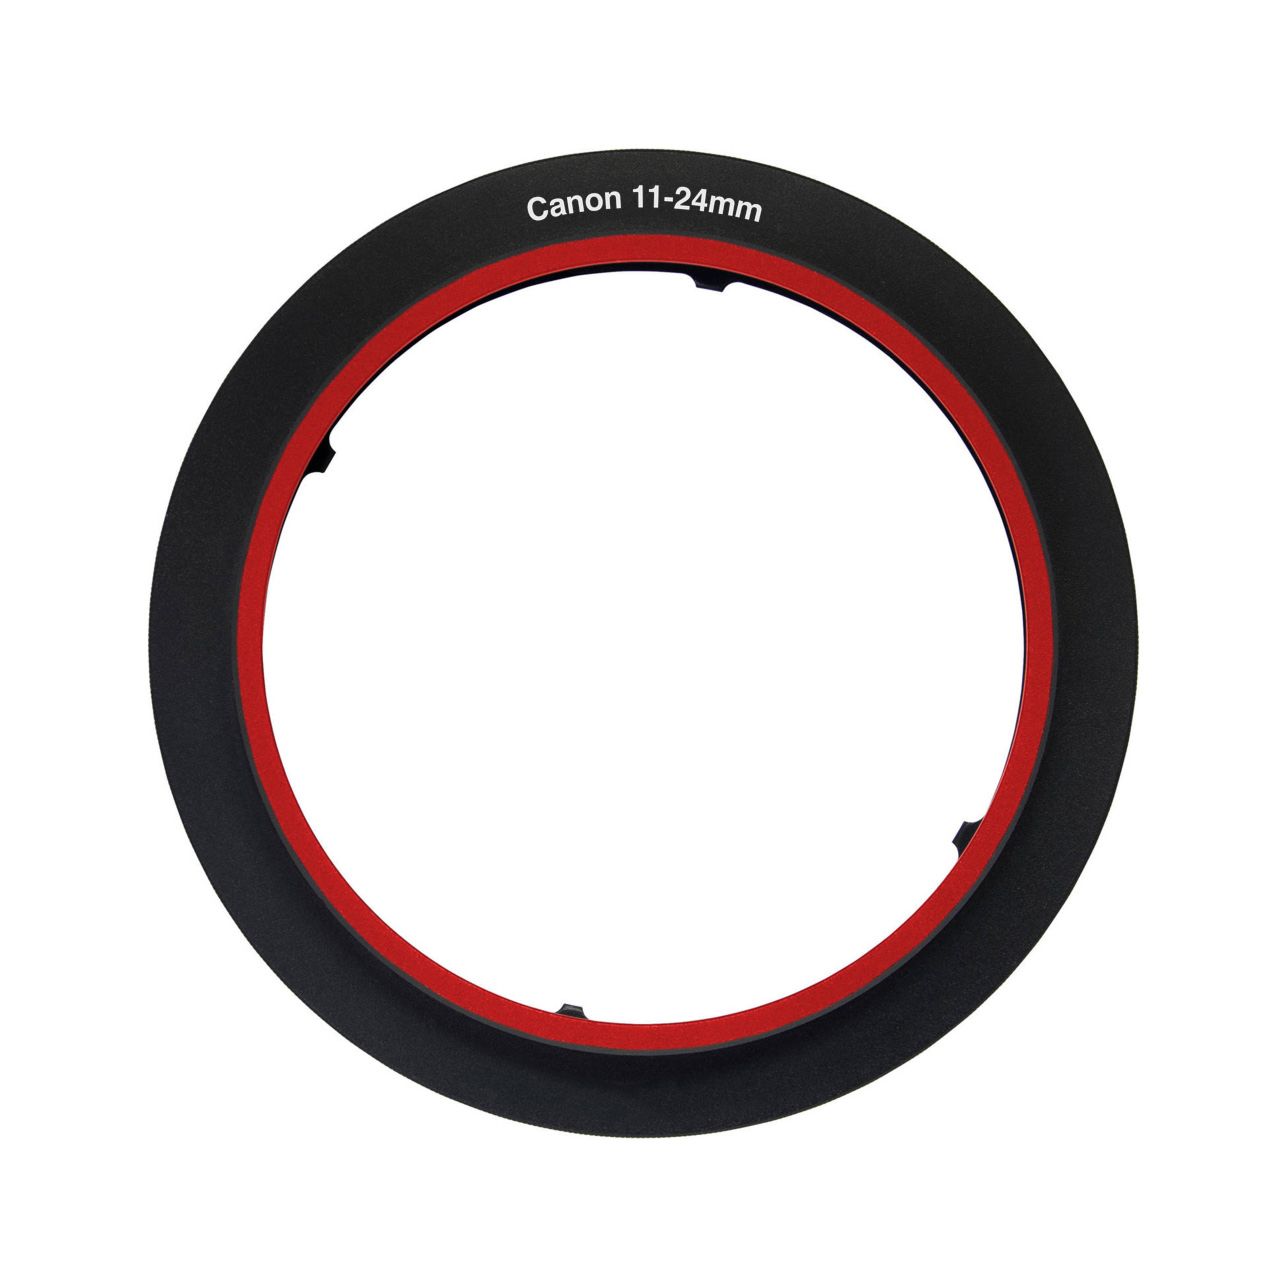 LEE Filters SW150 Lens Adapter Canon 11 24Mm